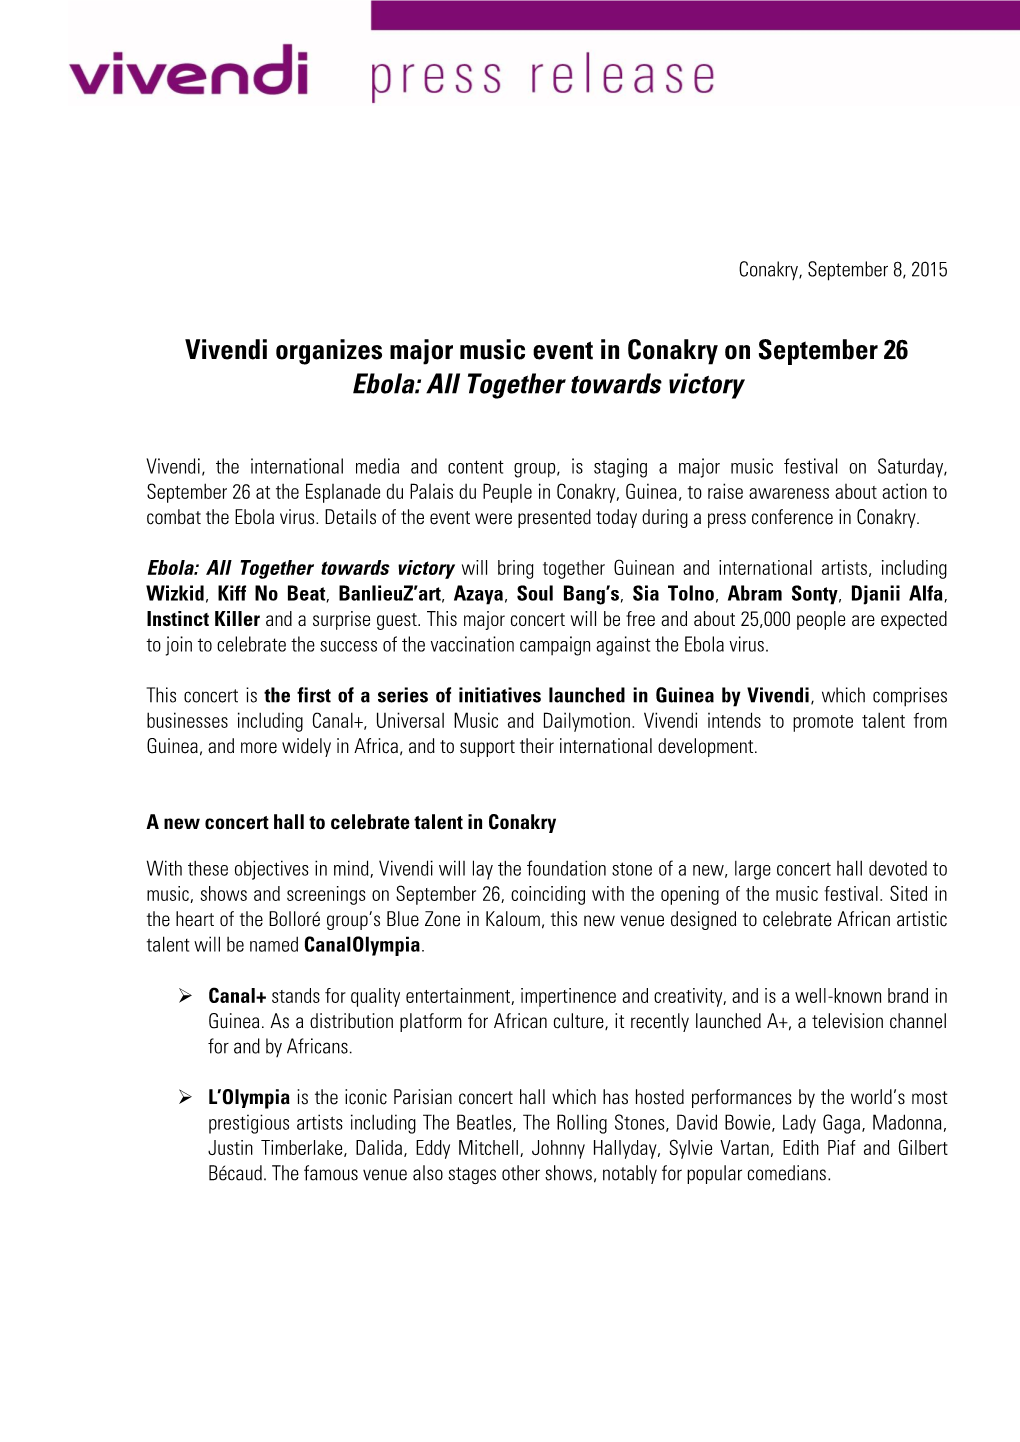 Vivendi Organizes Major Music Event in Conakry on September 26 Ebola: All Together Towards Victory